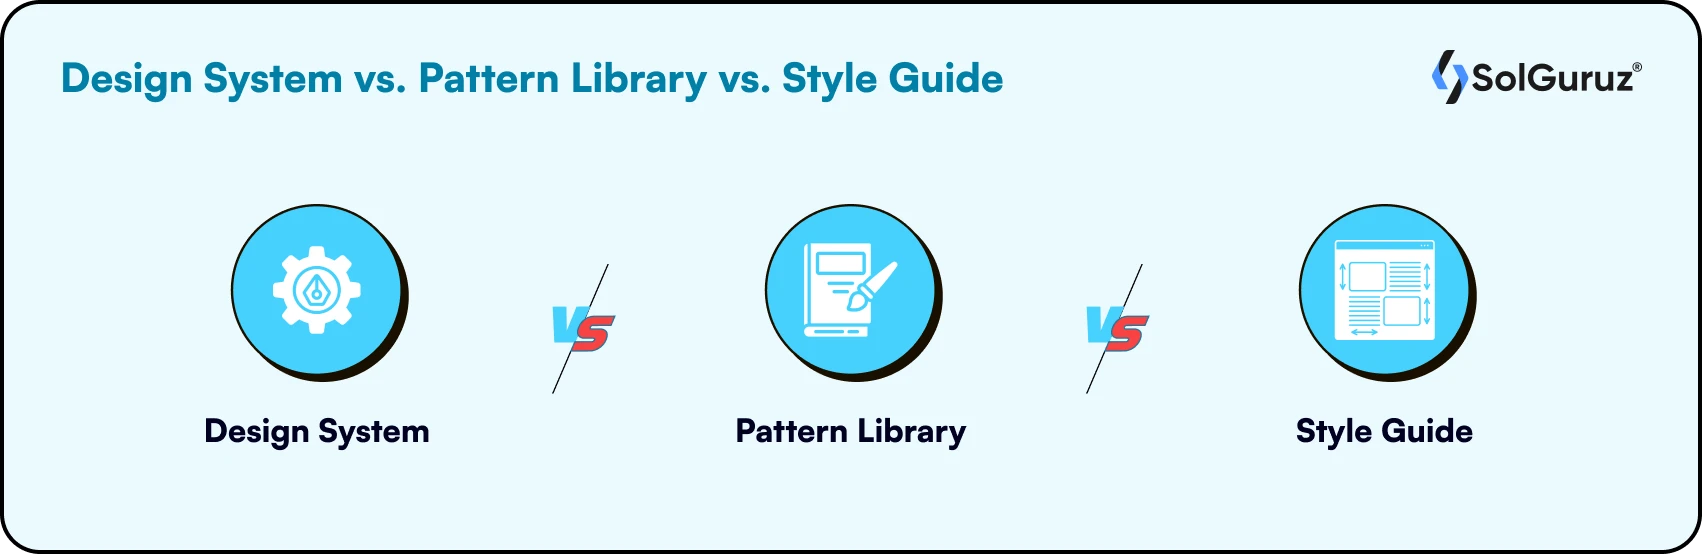 Design System vs Pattern Library vs Style Guide